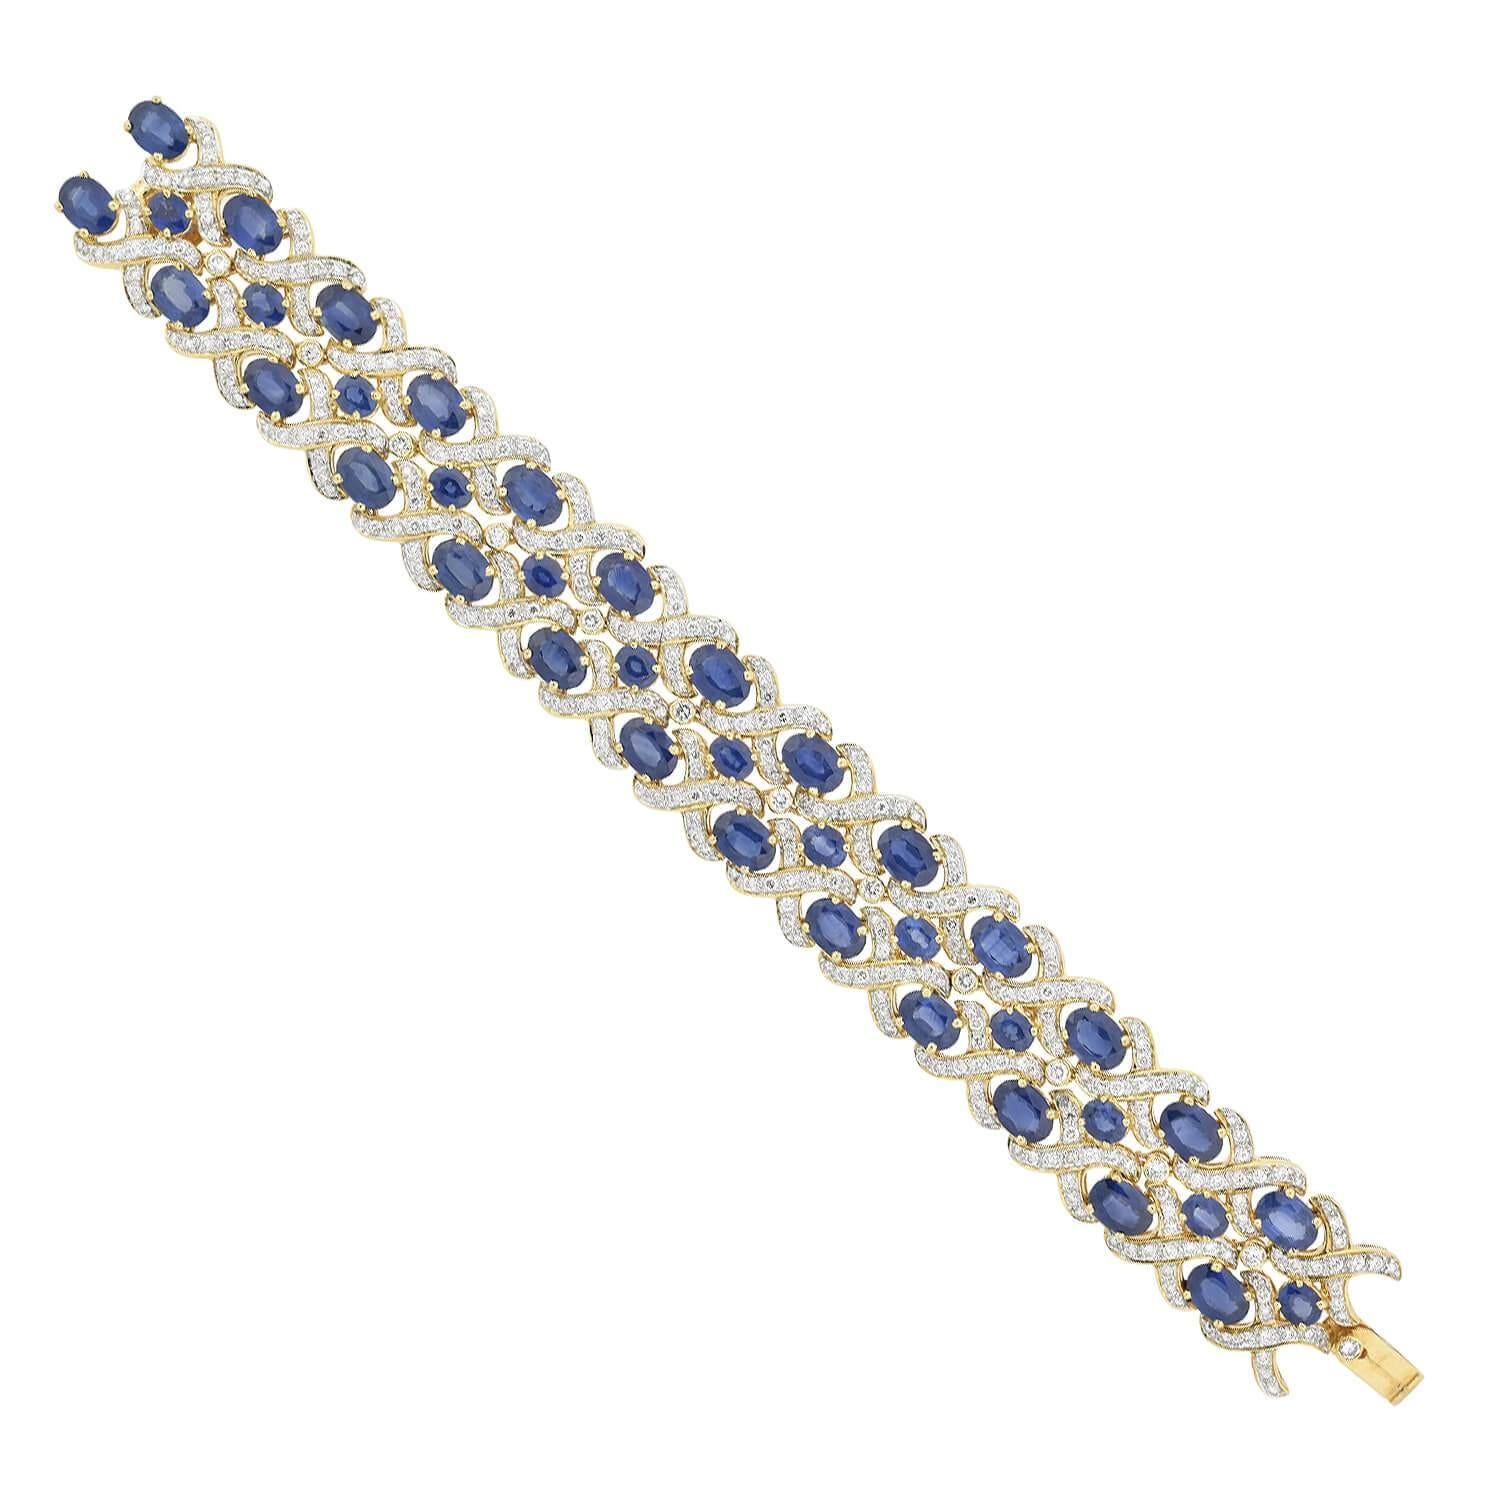 A Red Carpet worthy gemstone encrusted bracelet from the 1960s era! This exquisite piece is crafted in 18kt yellow gold and features a wide, flexible surface of diamond and sapphire encrusted links, which interlock to form a dramatic design. Each